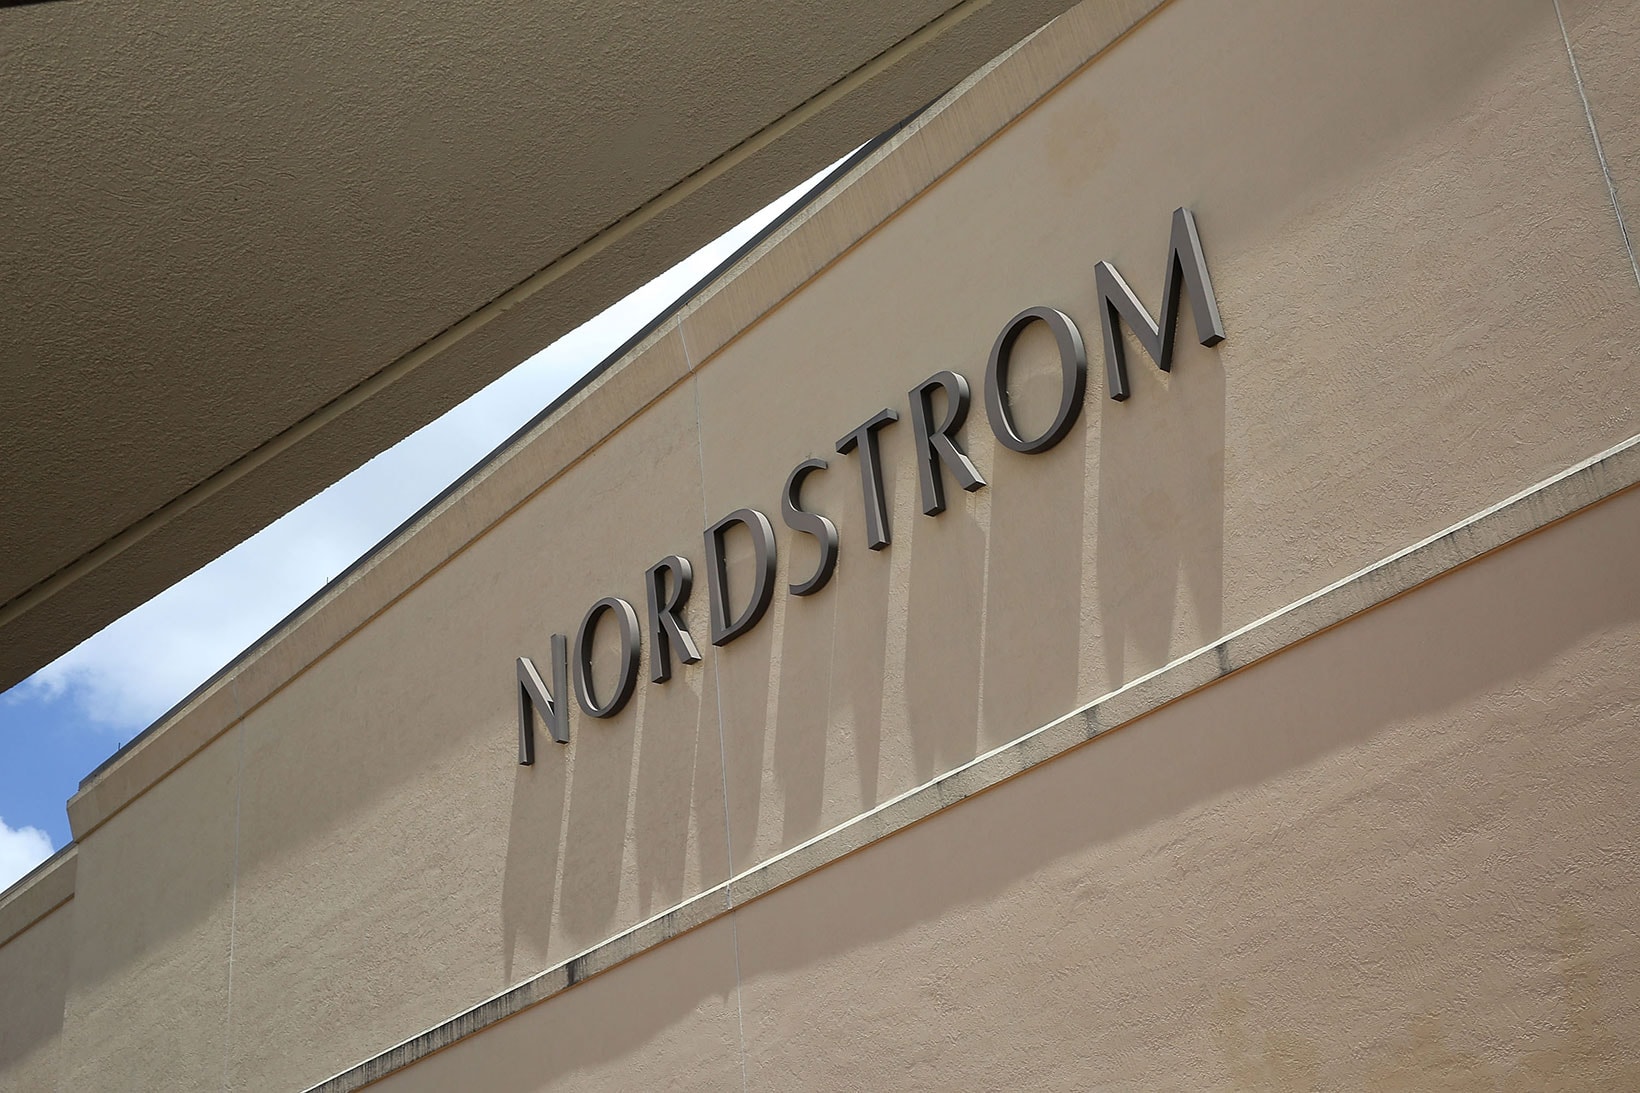 nordstrom pay equity parity race gender equality diversity inclusion 